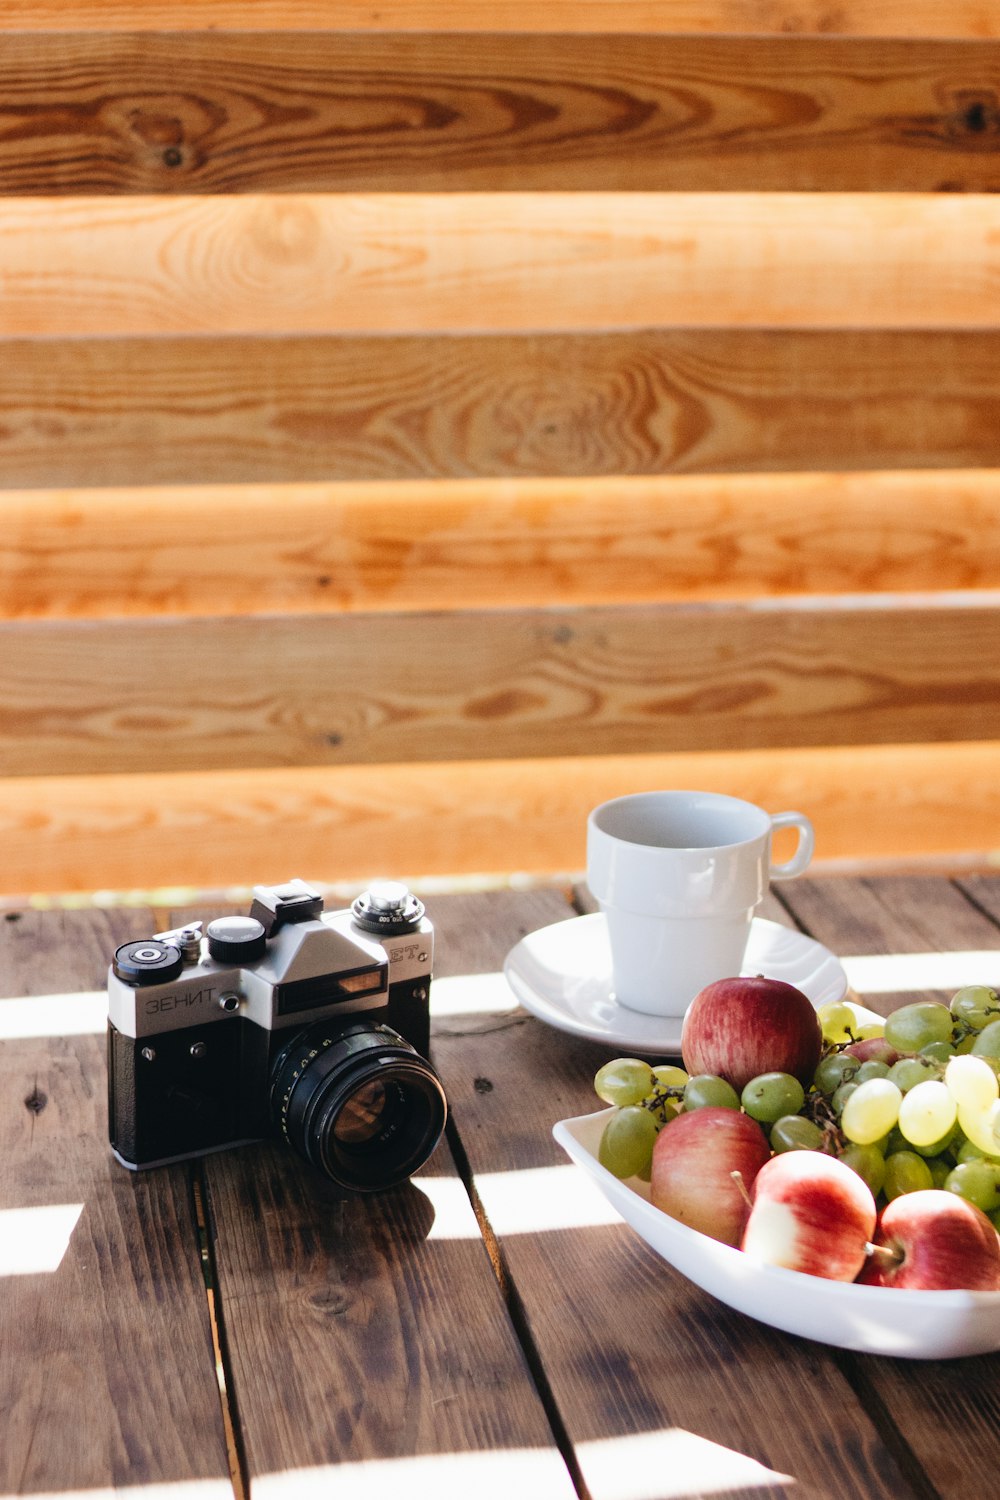 black and gray IMC camera beside white cup on saucer and fruits in bowl